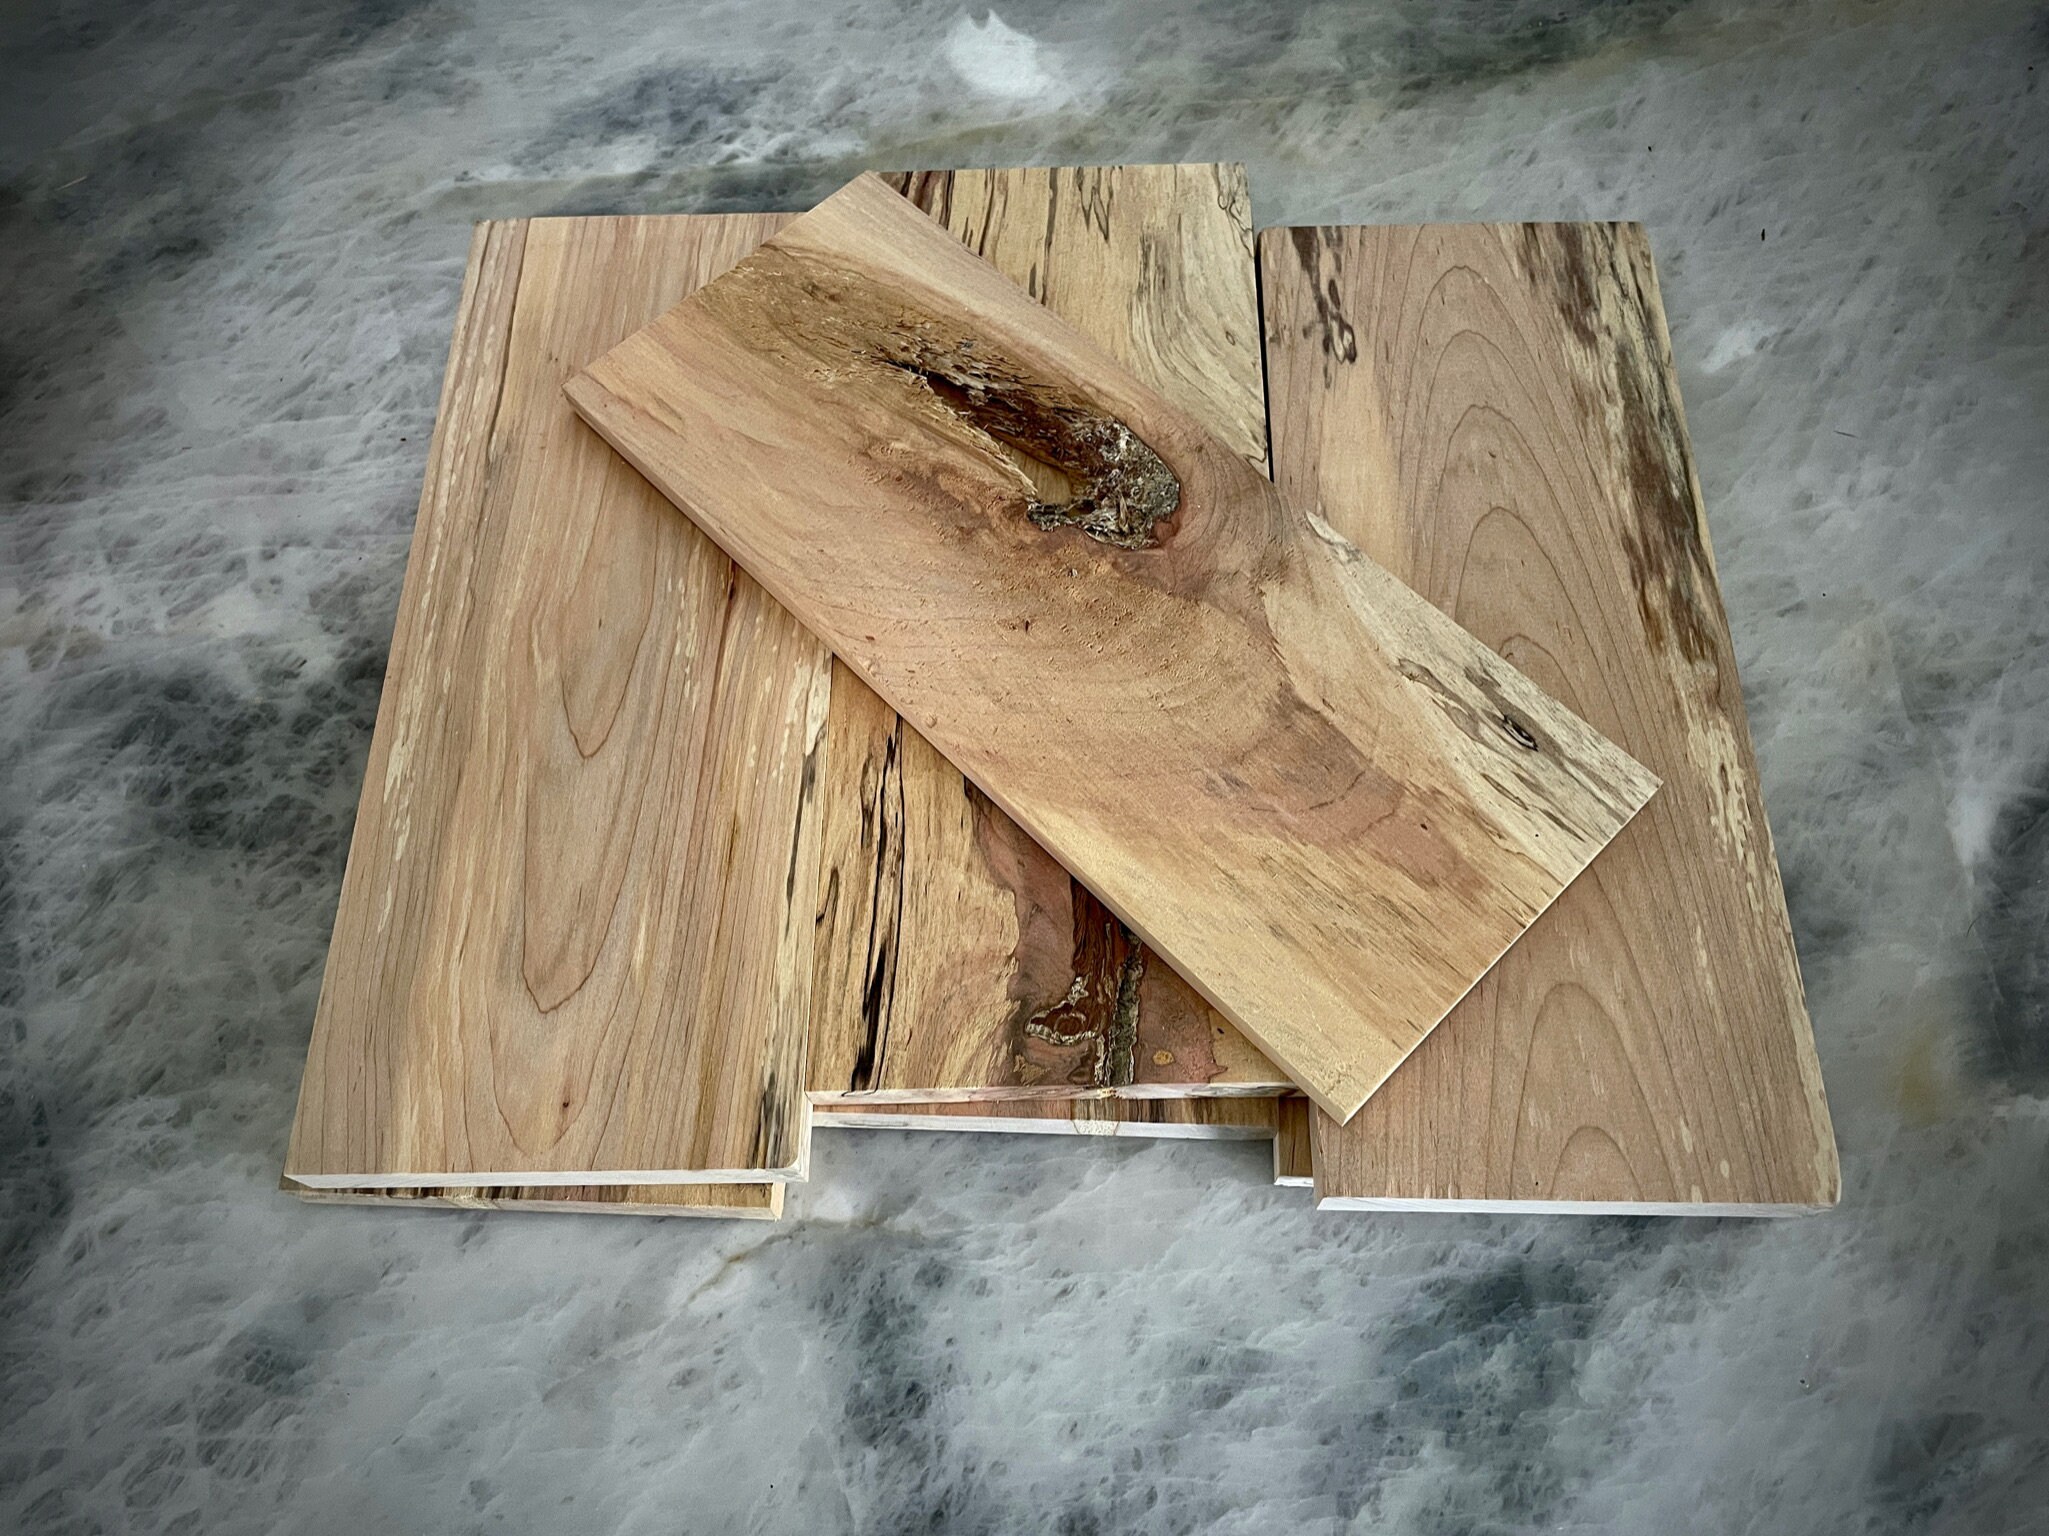 Scrap Wood & Cut Offs Project Ready Pieces Great for Crafts, Inlays, Epoxy  up to 15 Pounds With Pieces of Oak, Poplar, Cherry, Maple, Etc 